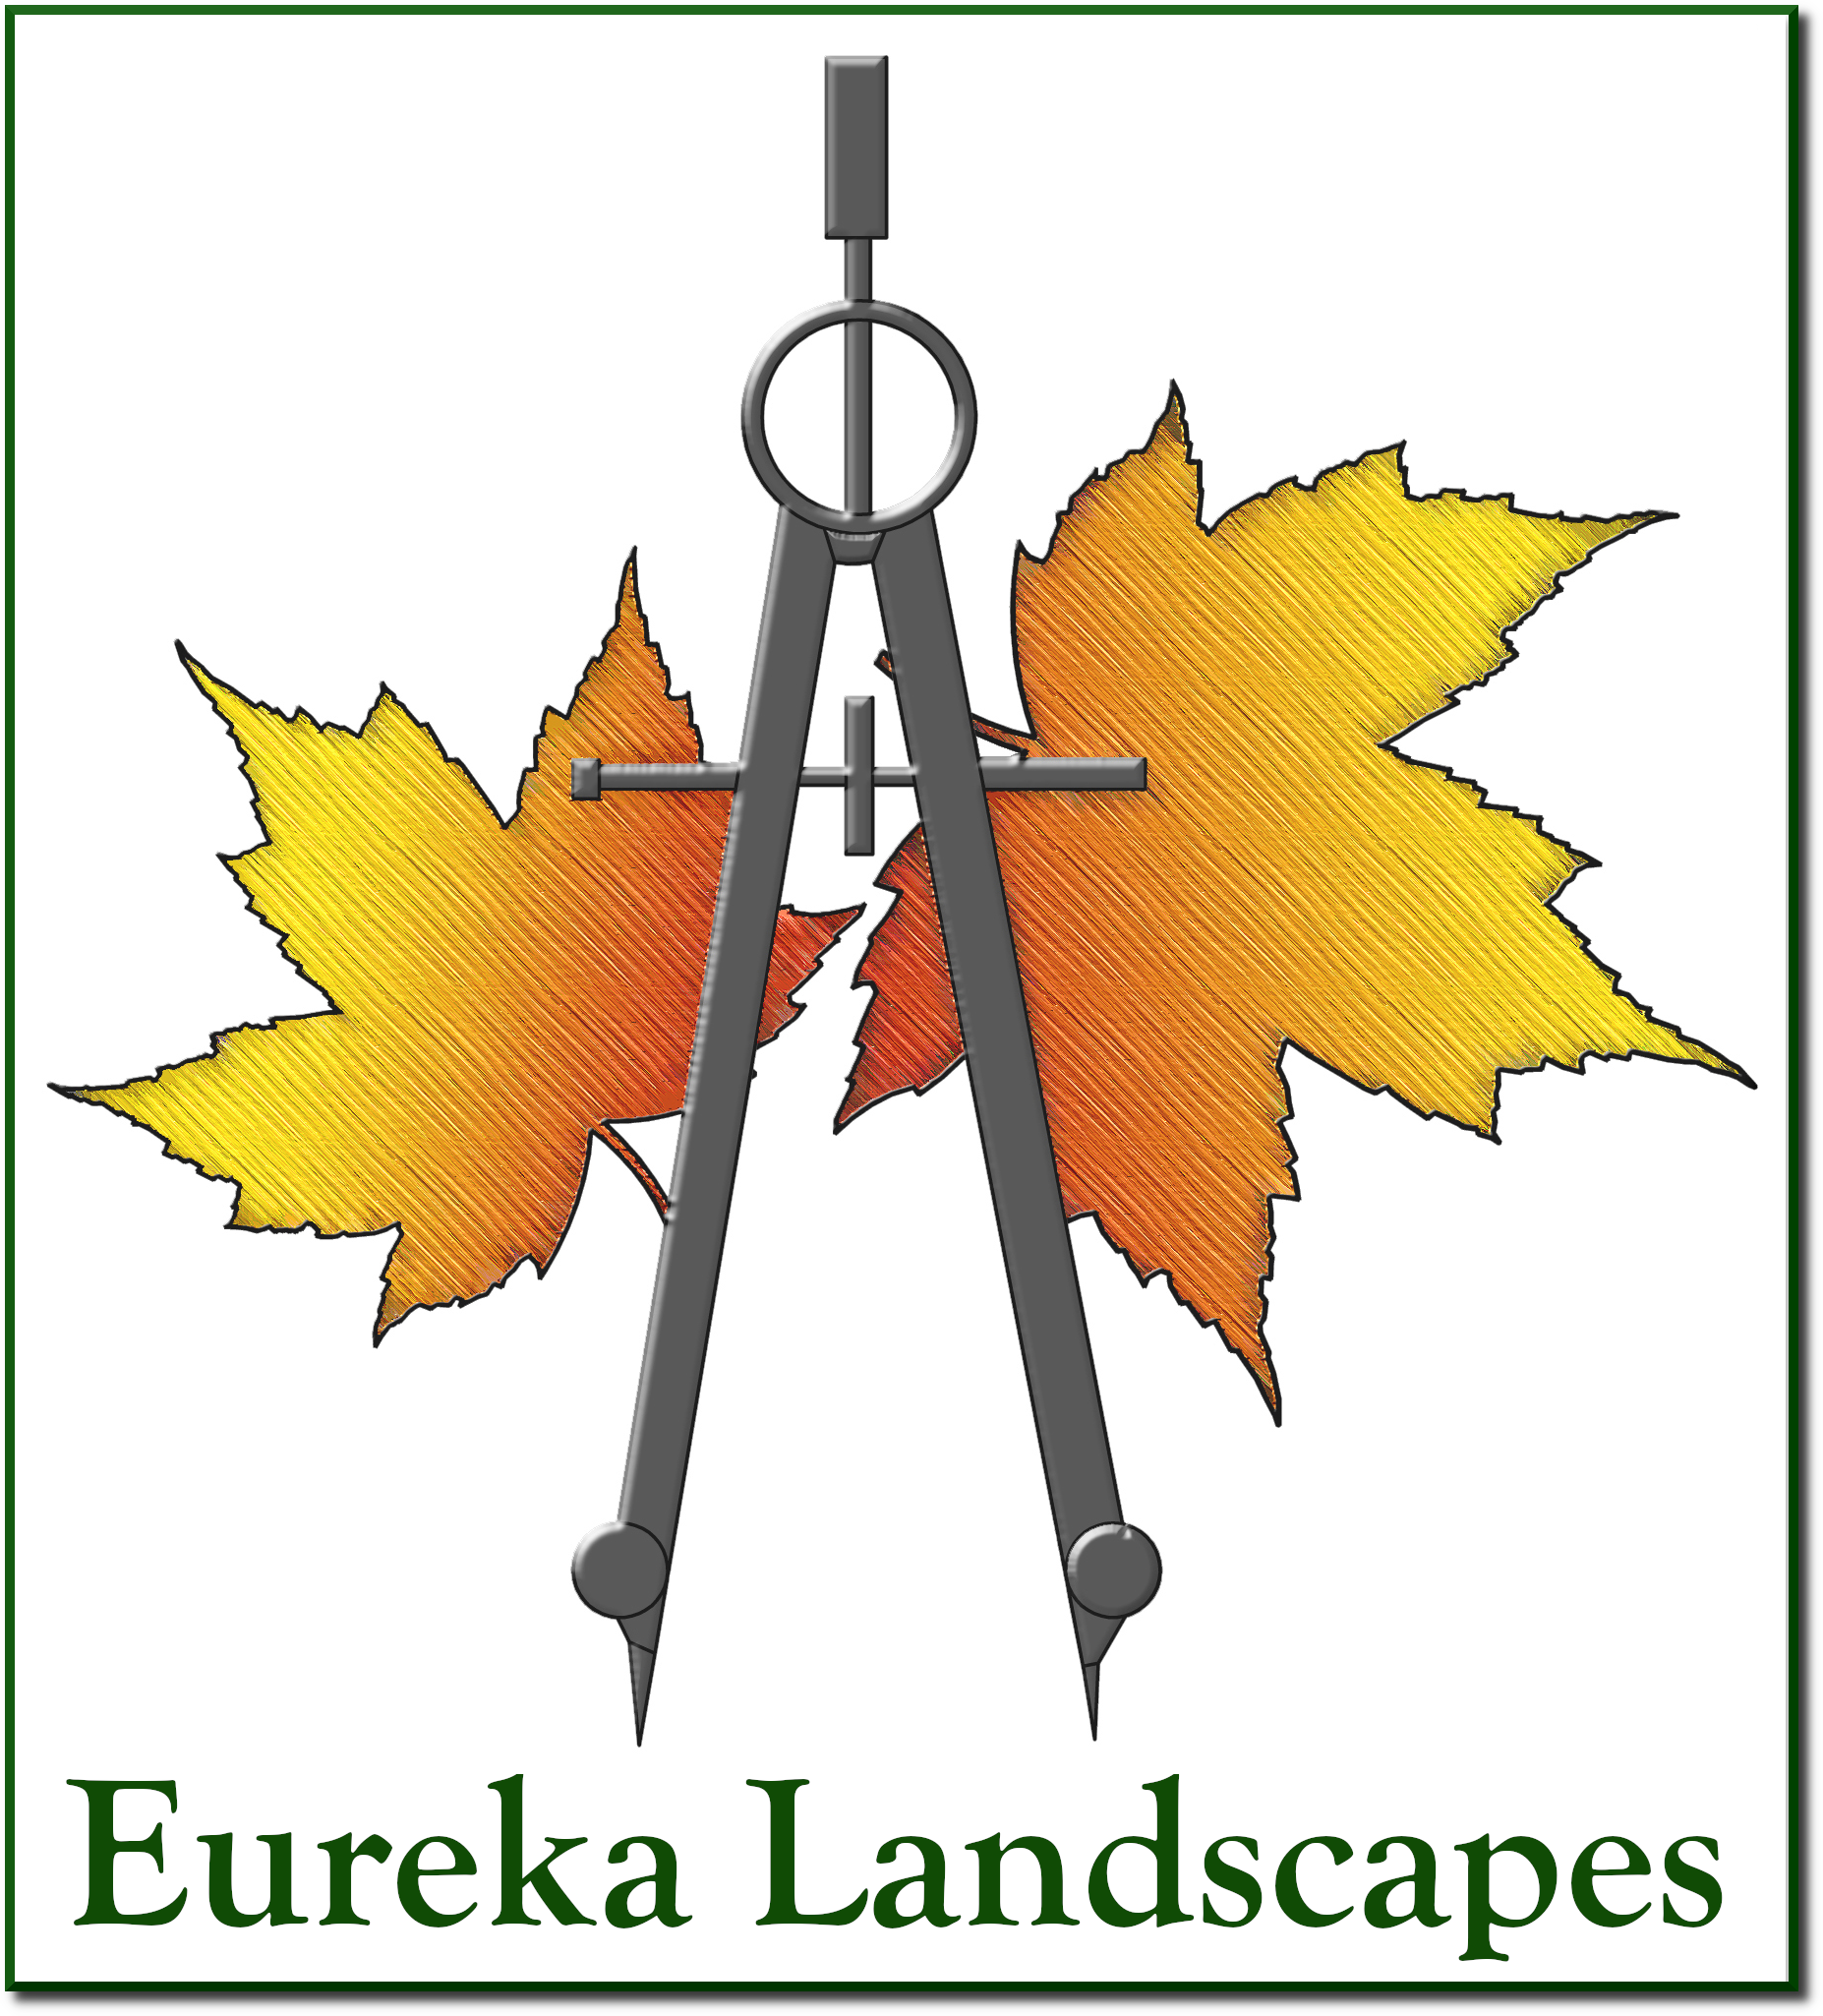 Eureka Landscapes logo with a drafting compass and two maple leaves